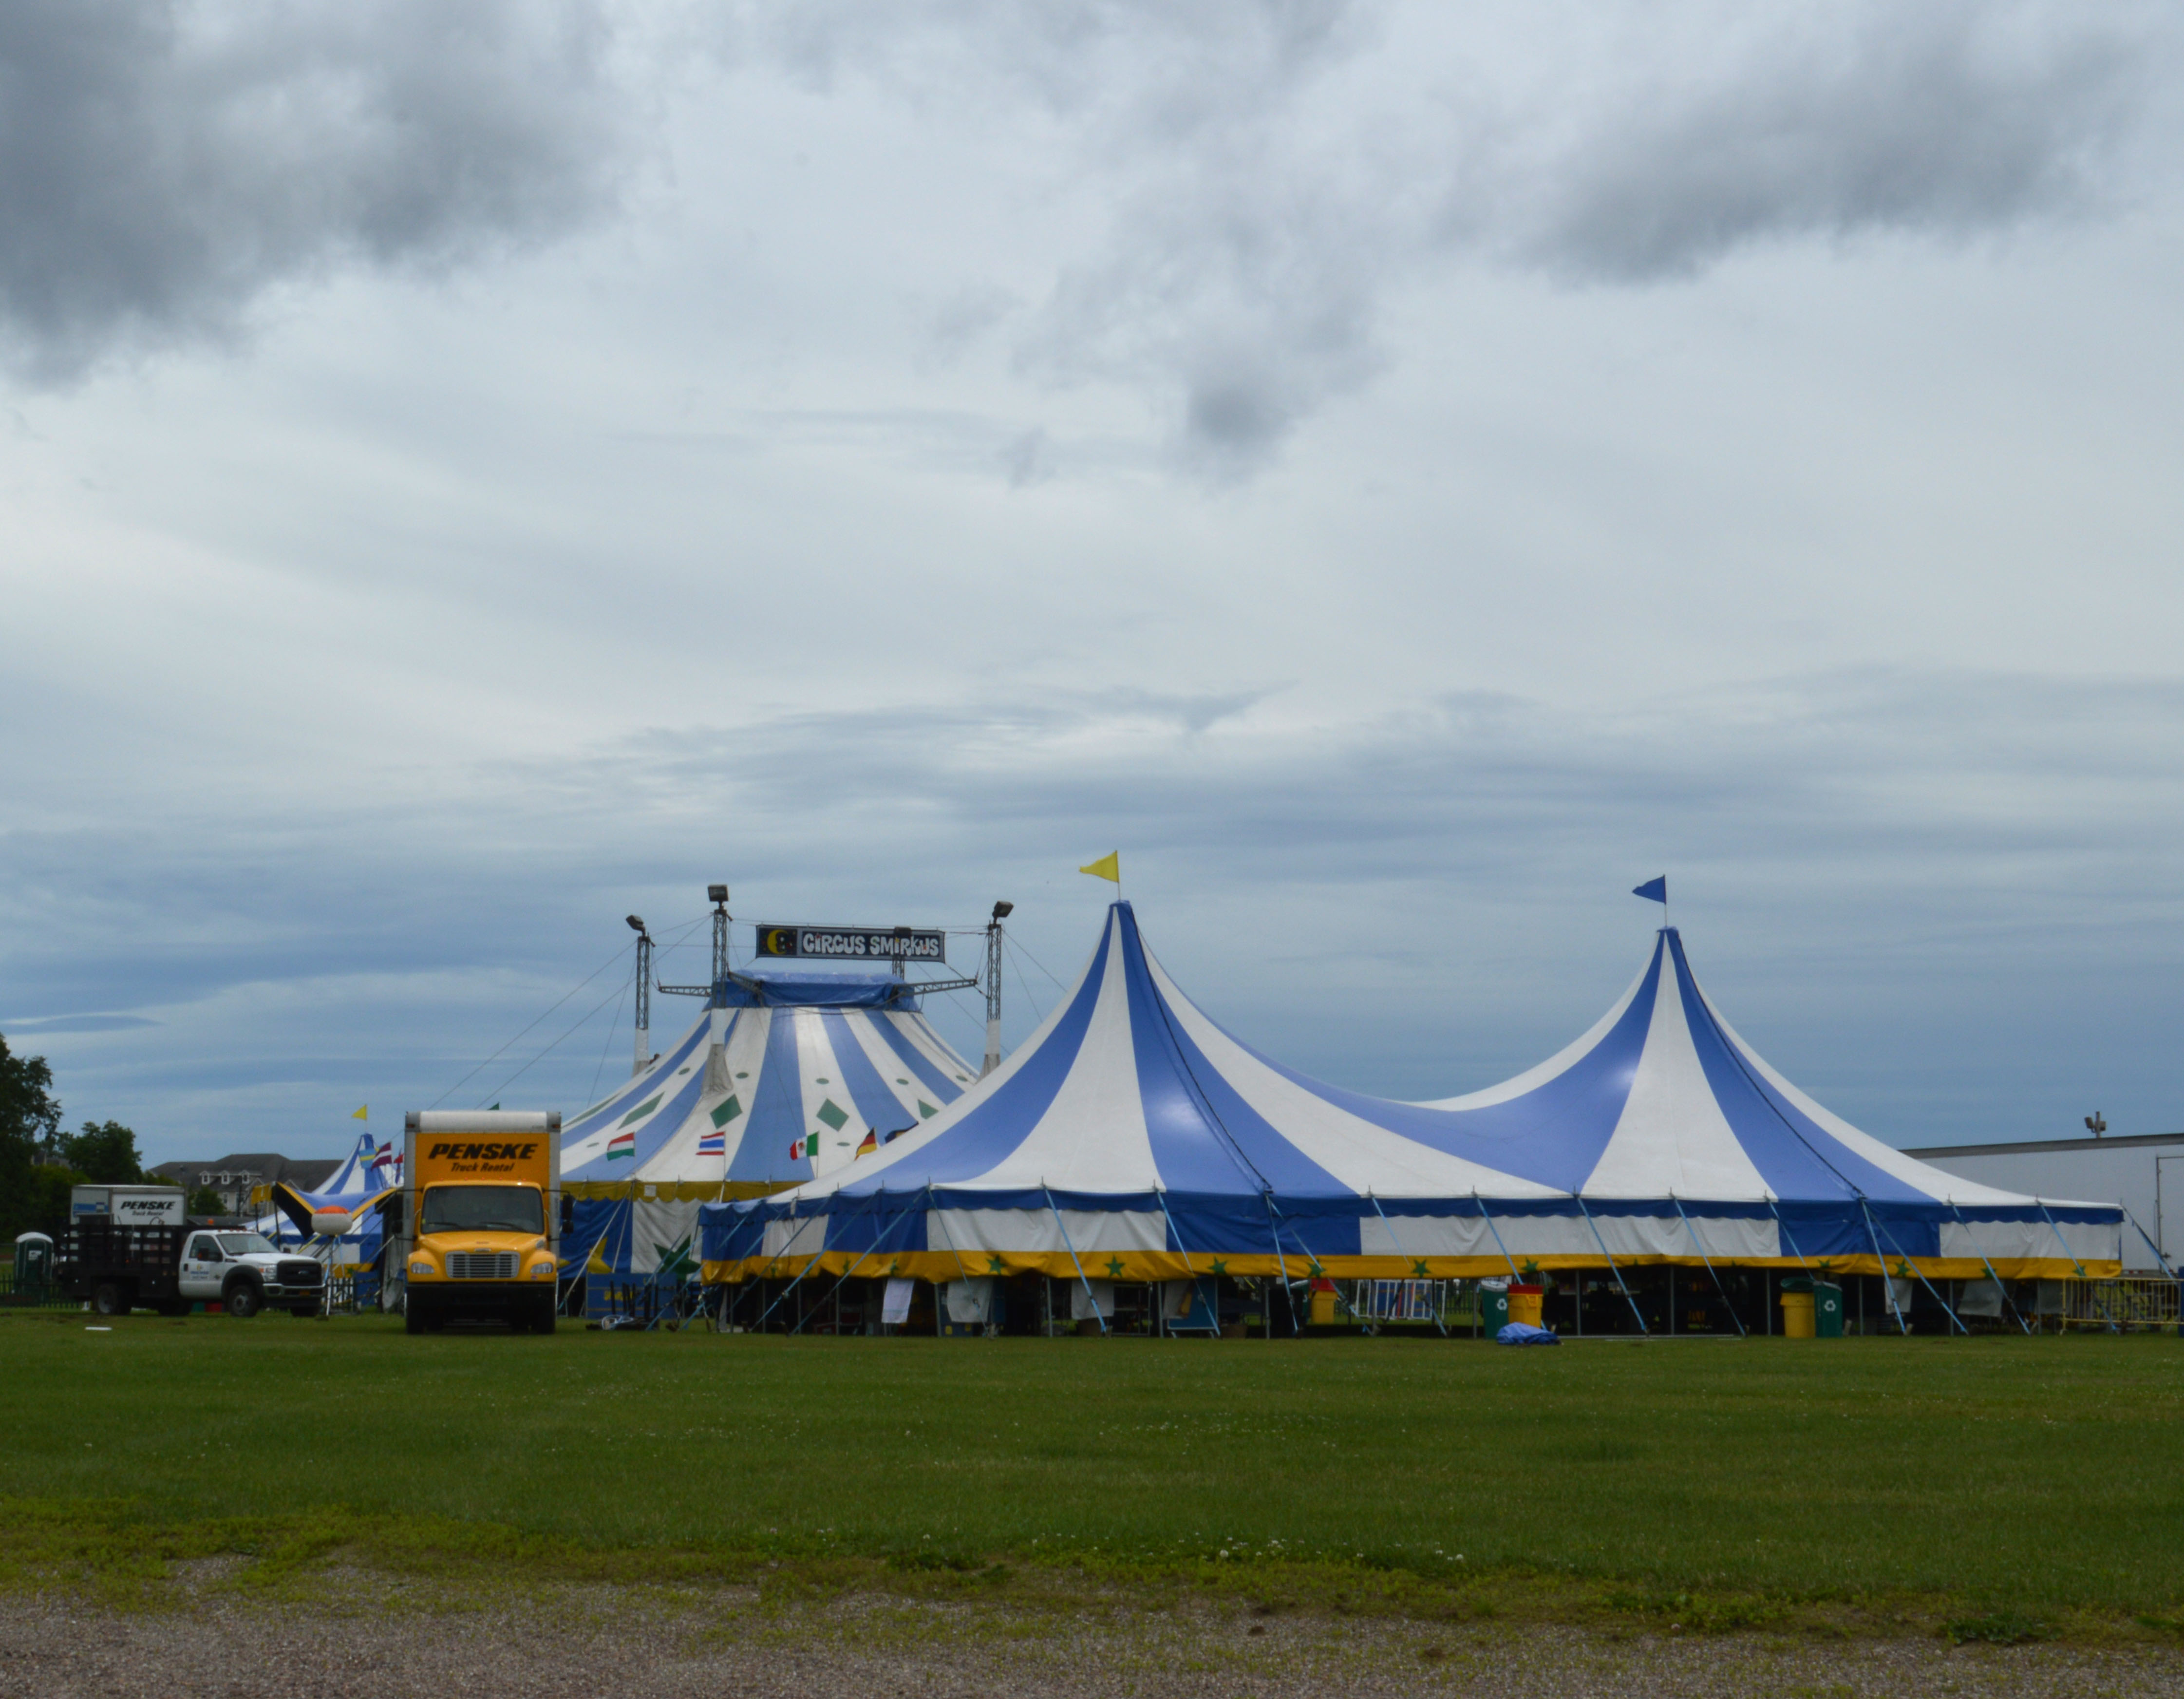 We did it! The Big Top is up and awaiting your arrival in Essex Junction for our July 1-3 shows at the Champlain Valley Expo.